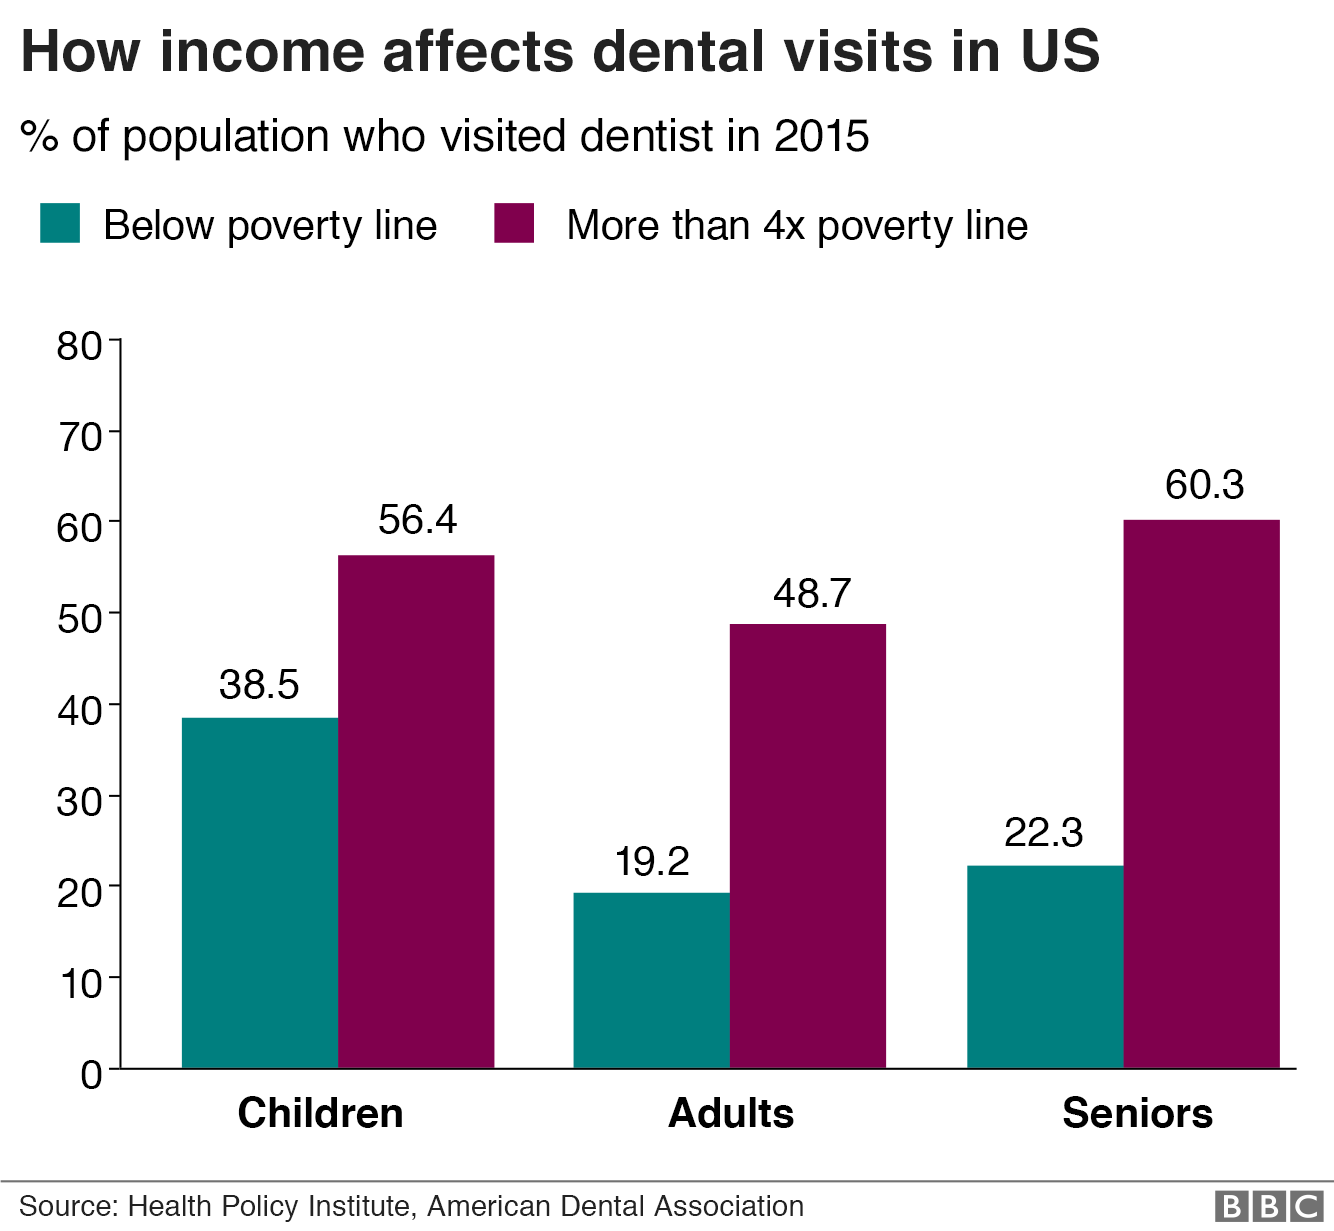 How income affects dental treatment in the US